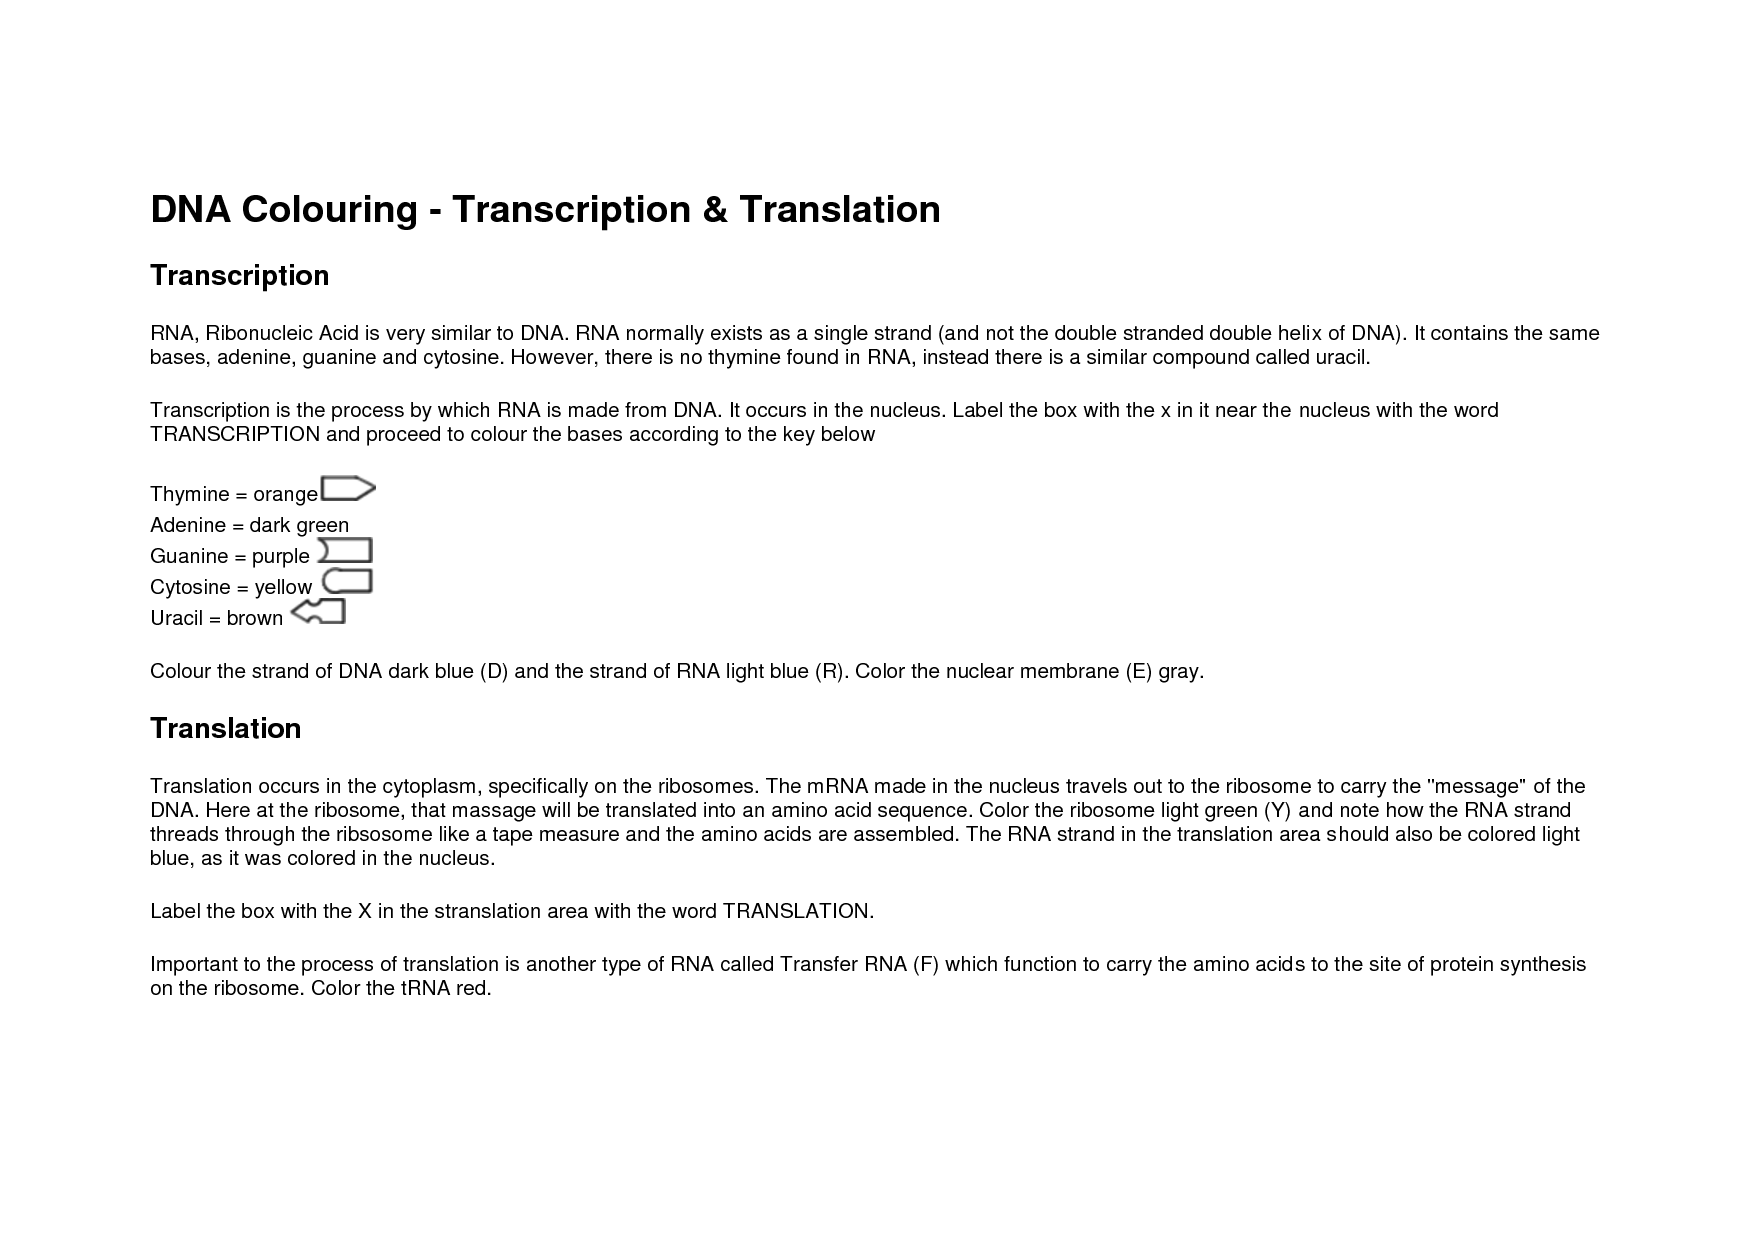 DNA Coloring Transcription and Translation Answer Key